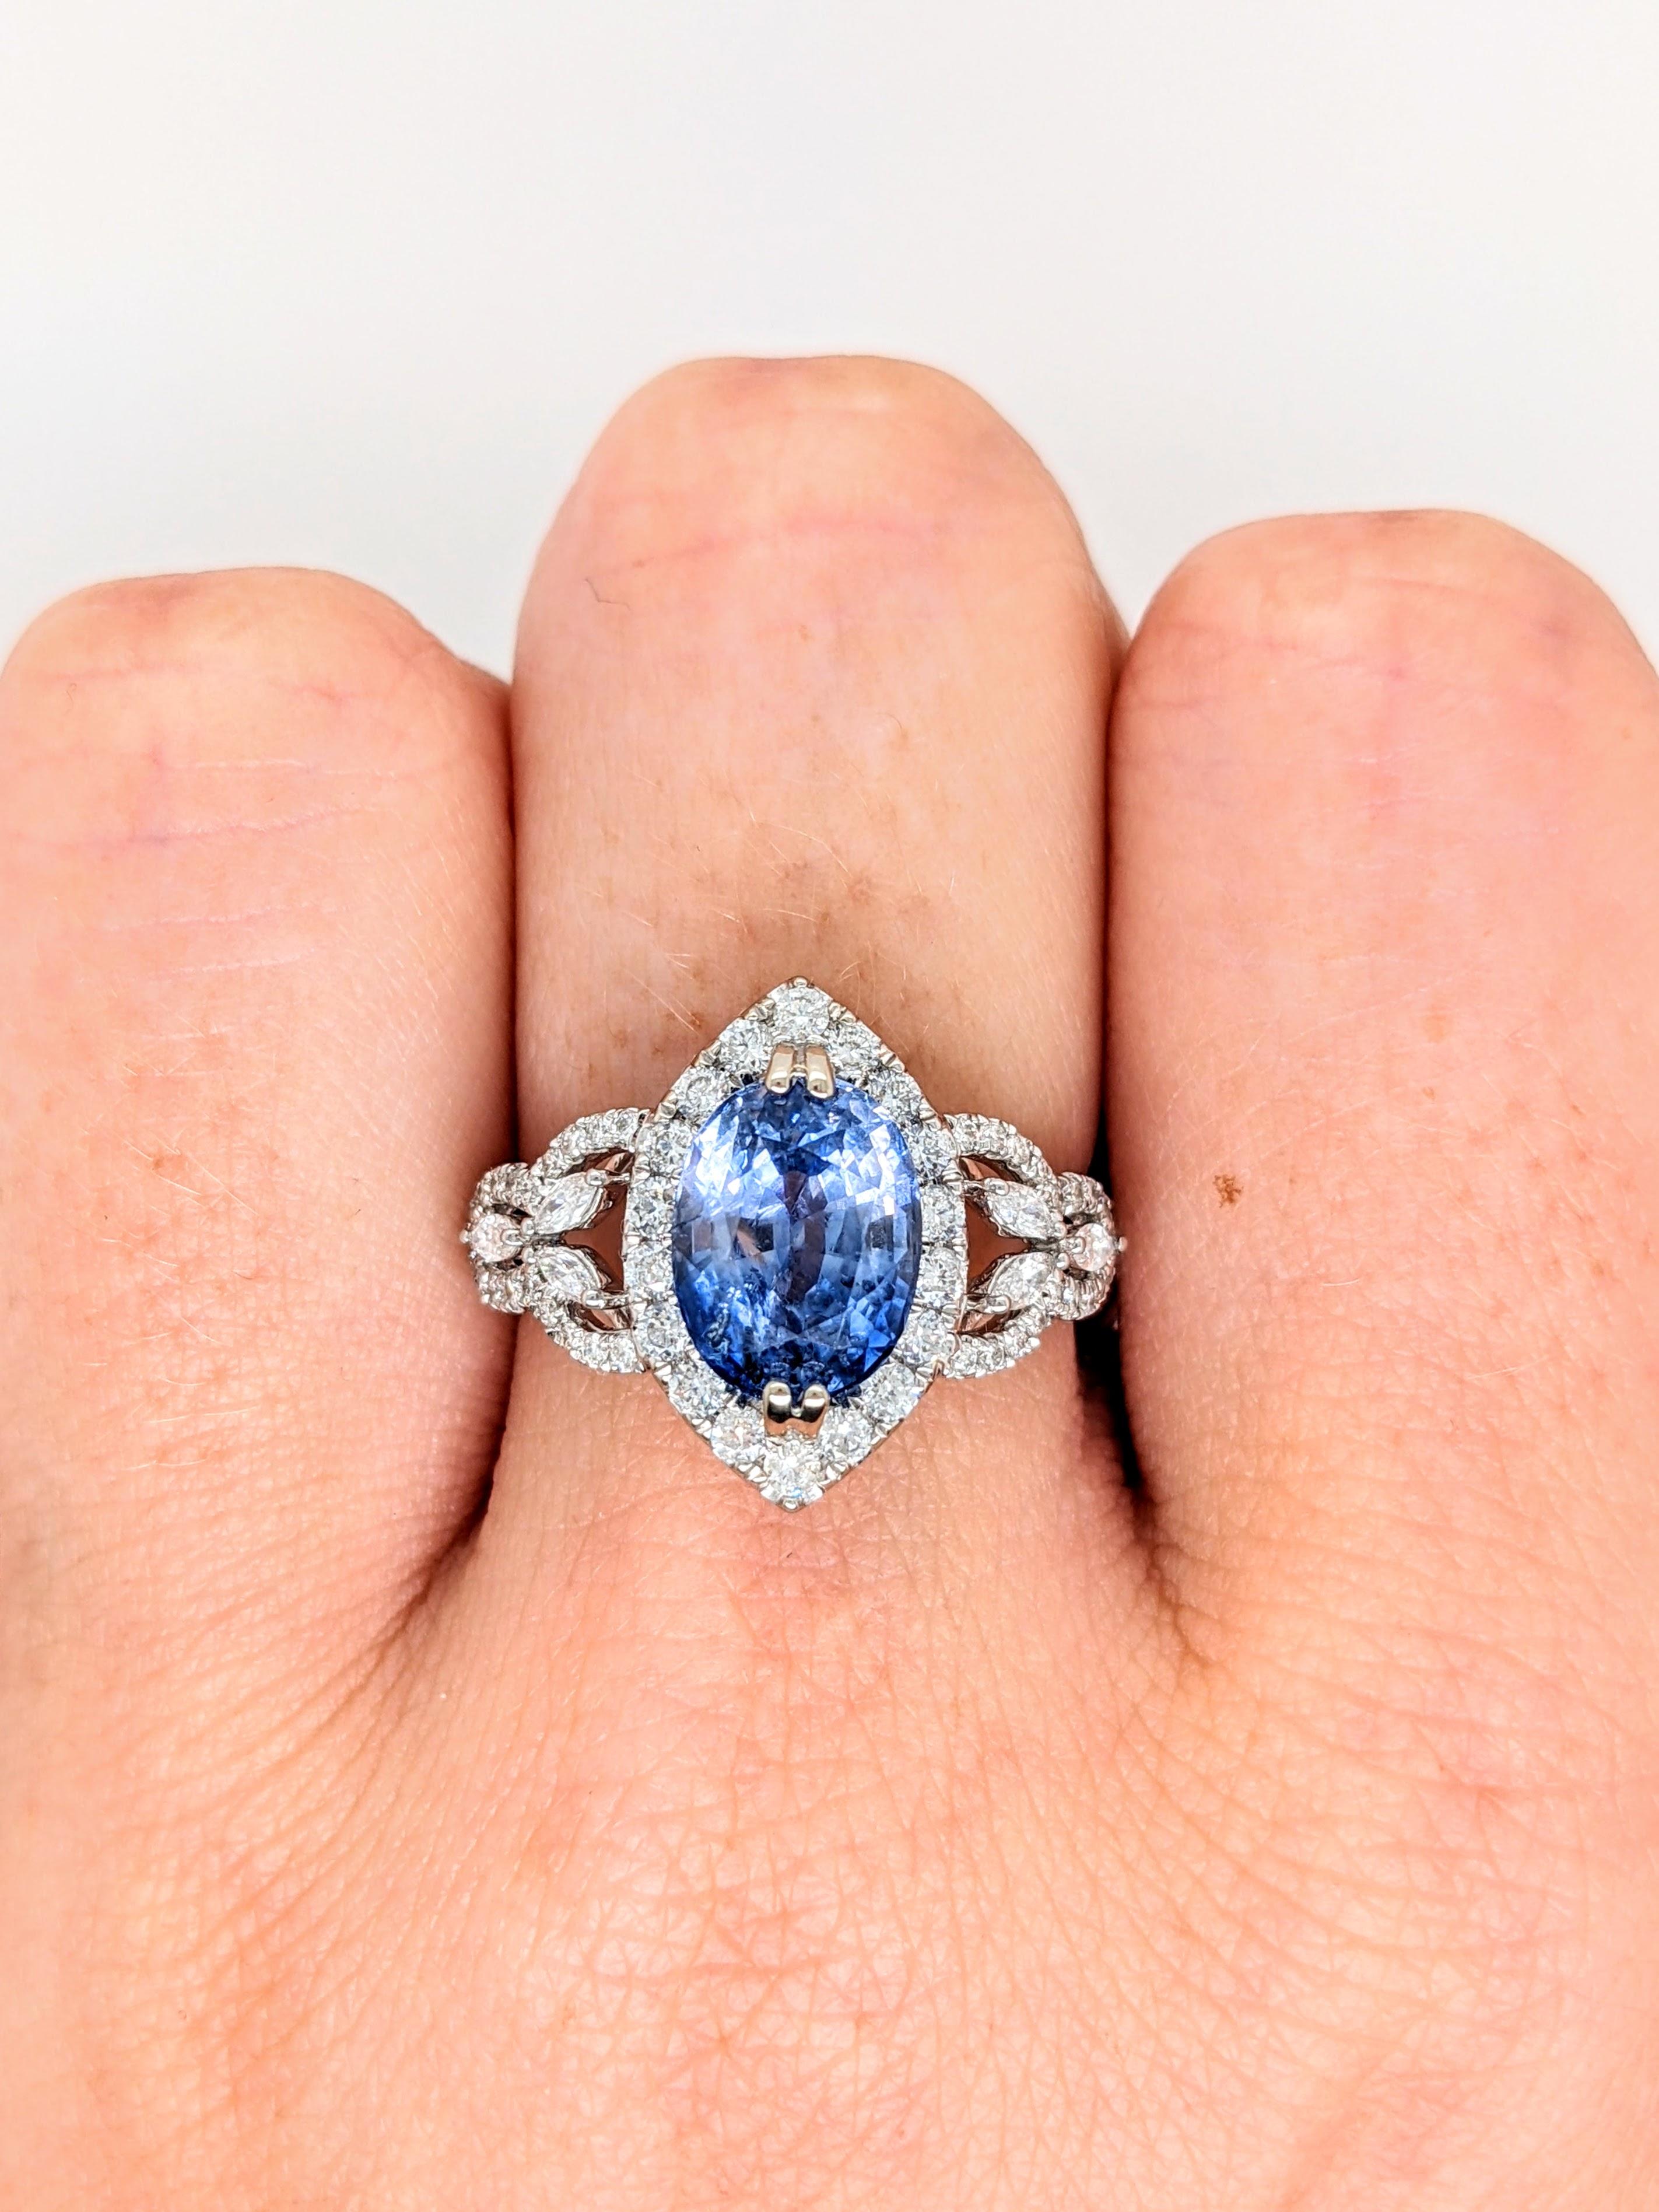 Women's or Men's Earth Mined 3.64ct Ceylon Sapphire Ring in 14K White Gold w Diamond Accents